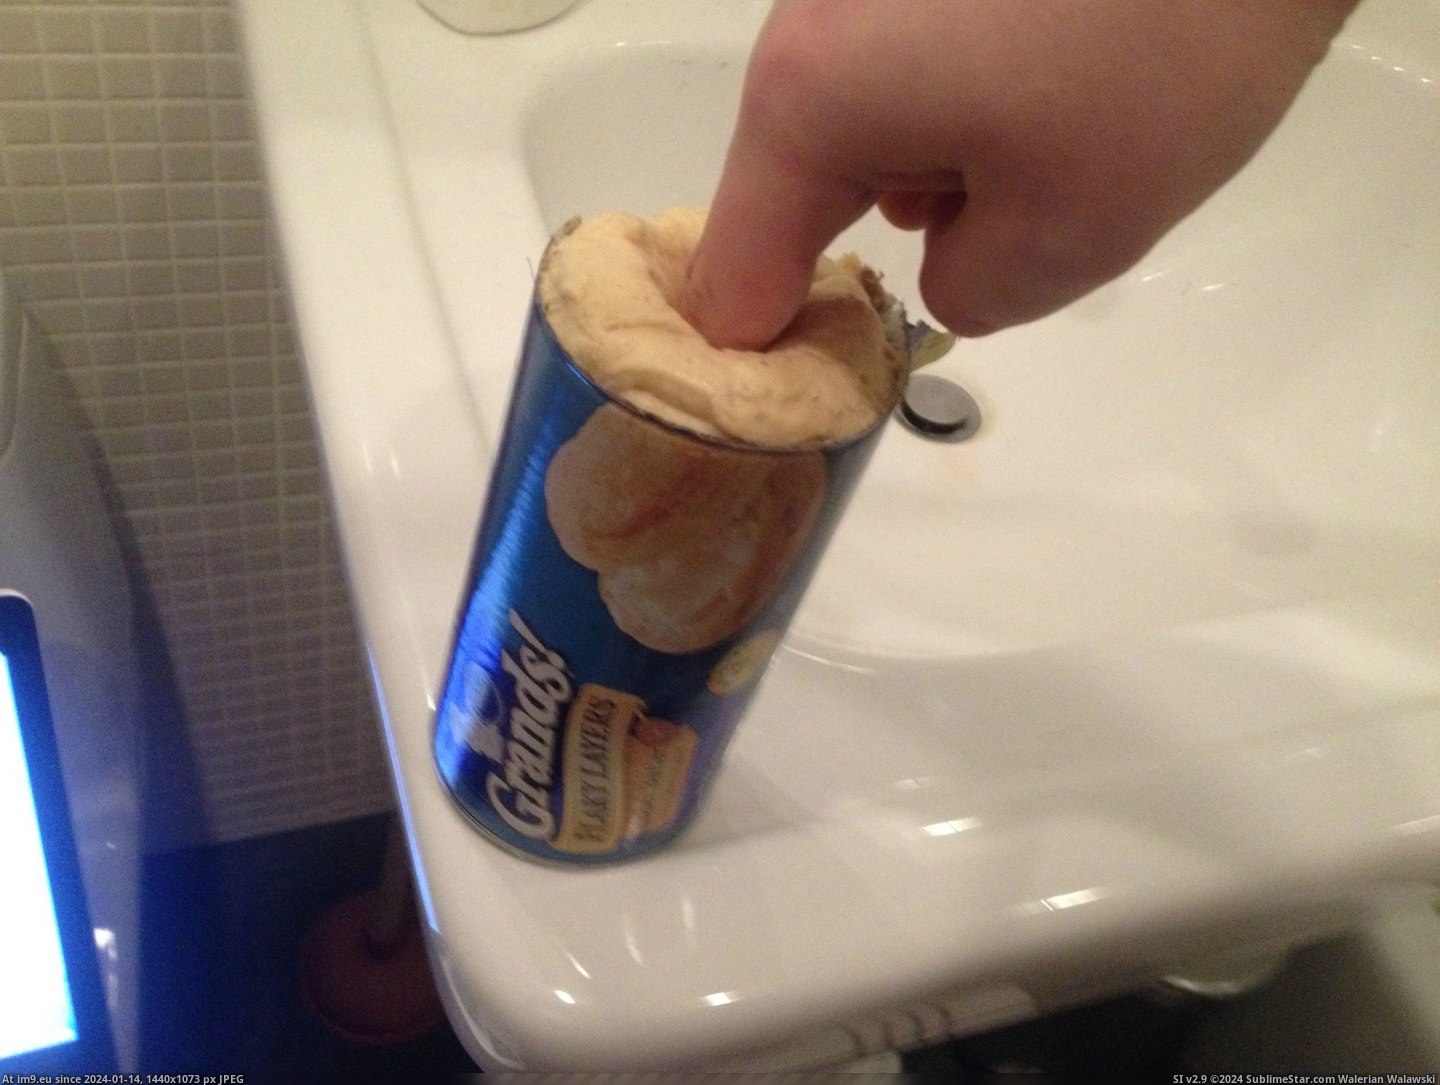 #Wtf #Can #Jerk #Grands #Pillsbury #Off #Redditor [Wtf] Redditor uses can of Pillsbury Grands to jerk off. [NSFW obviously] 12 Pic. (Изображение из альбом My r/WTF favs))